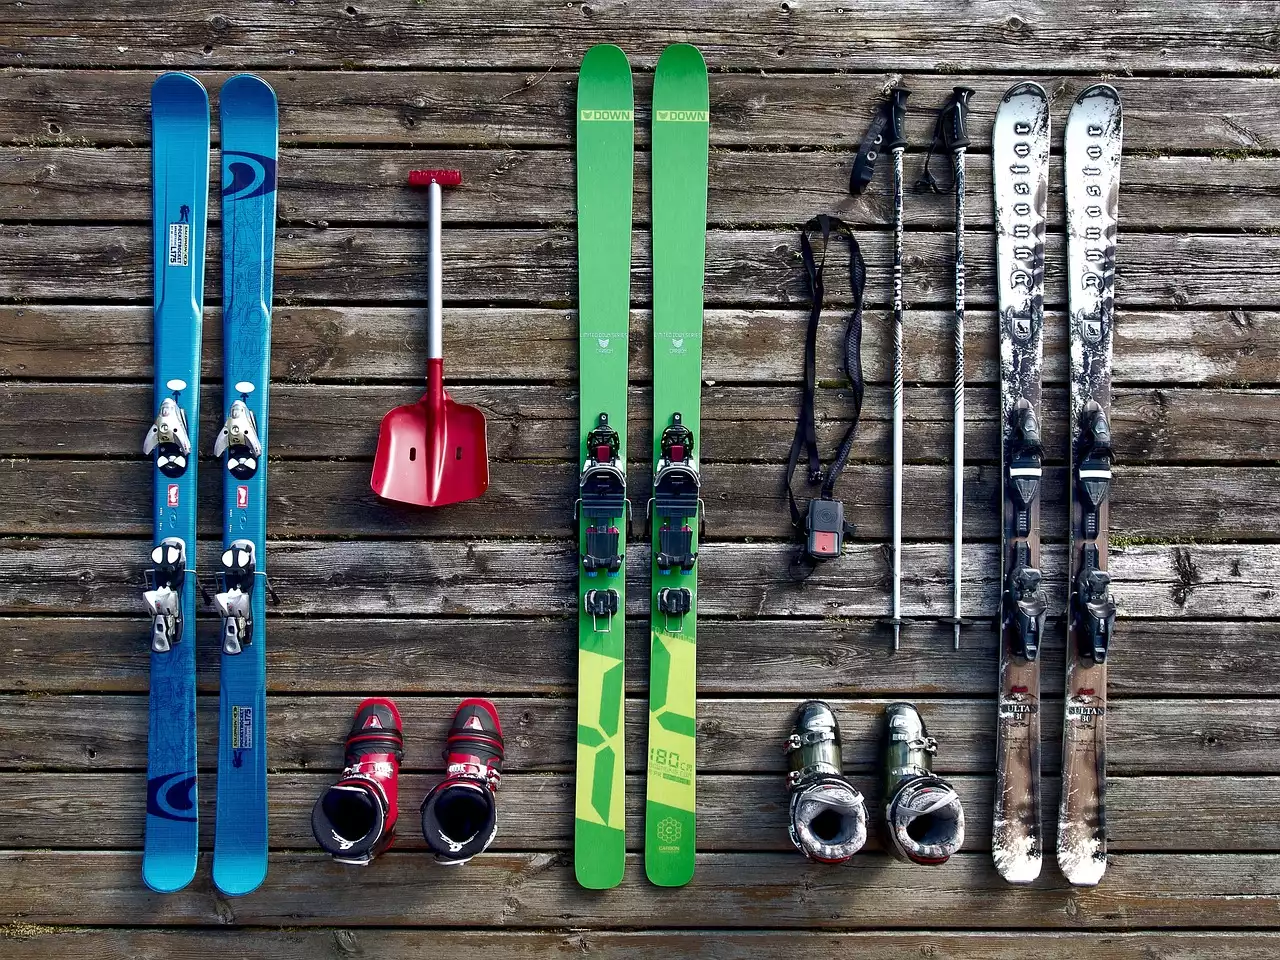 A Brief History of Ski Gear: How Technology Has Revolutionized the Sport